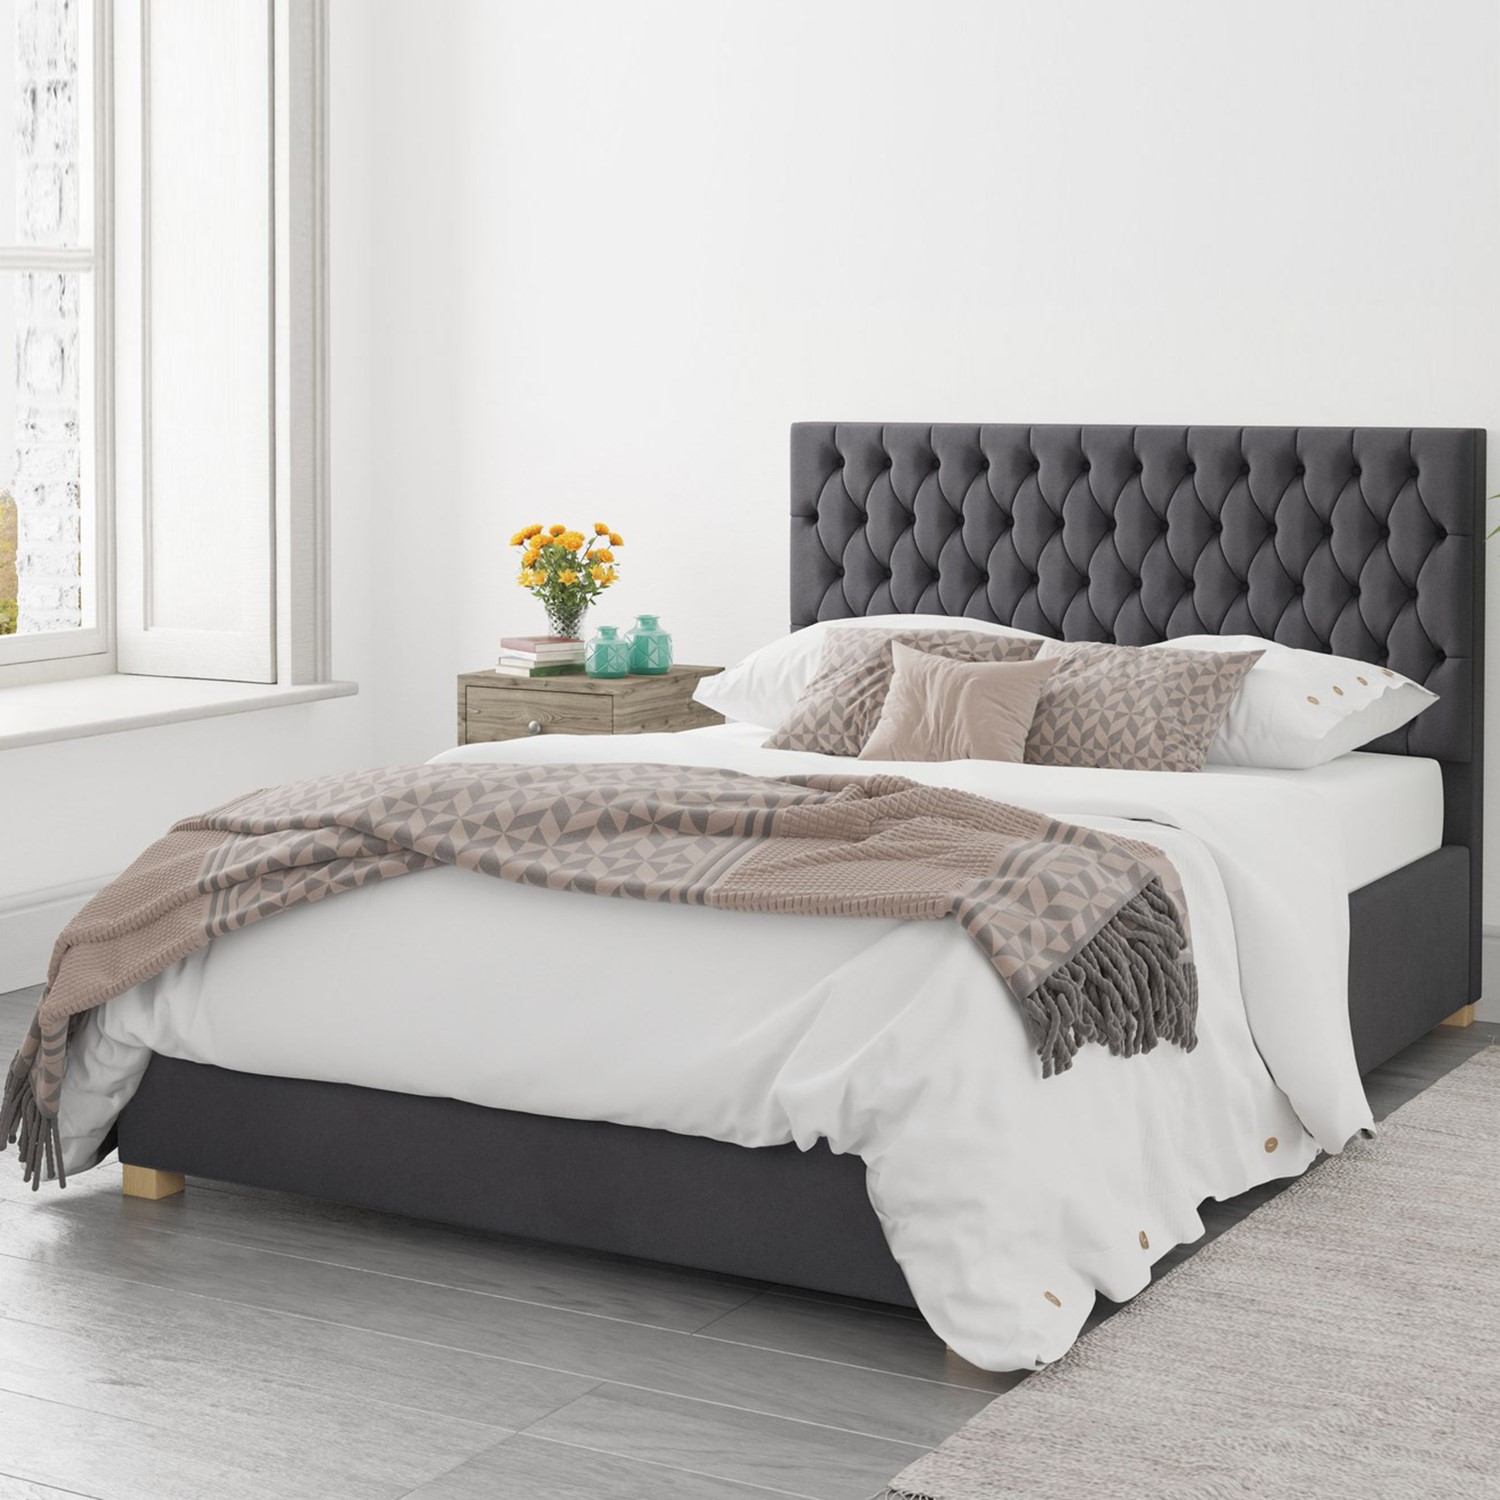 Read more about Dark grey velvet double ottoman bed angel aspire